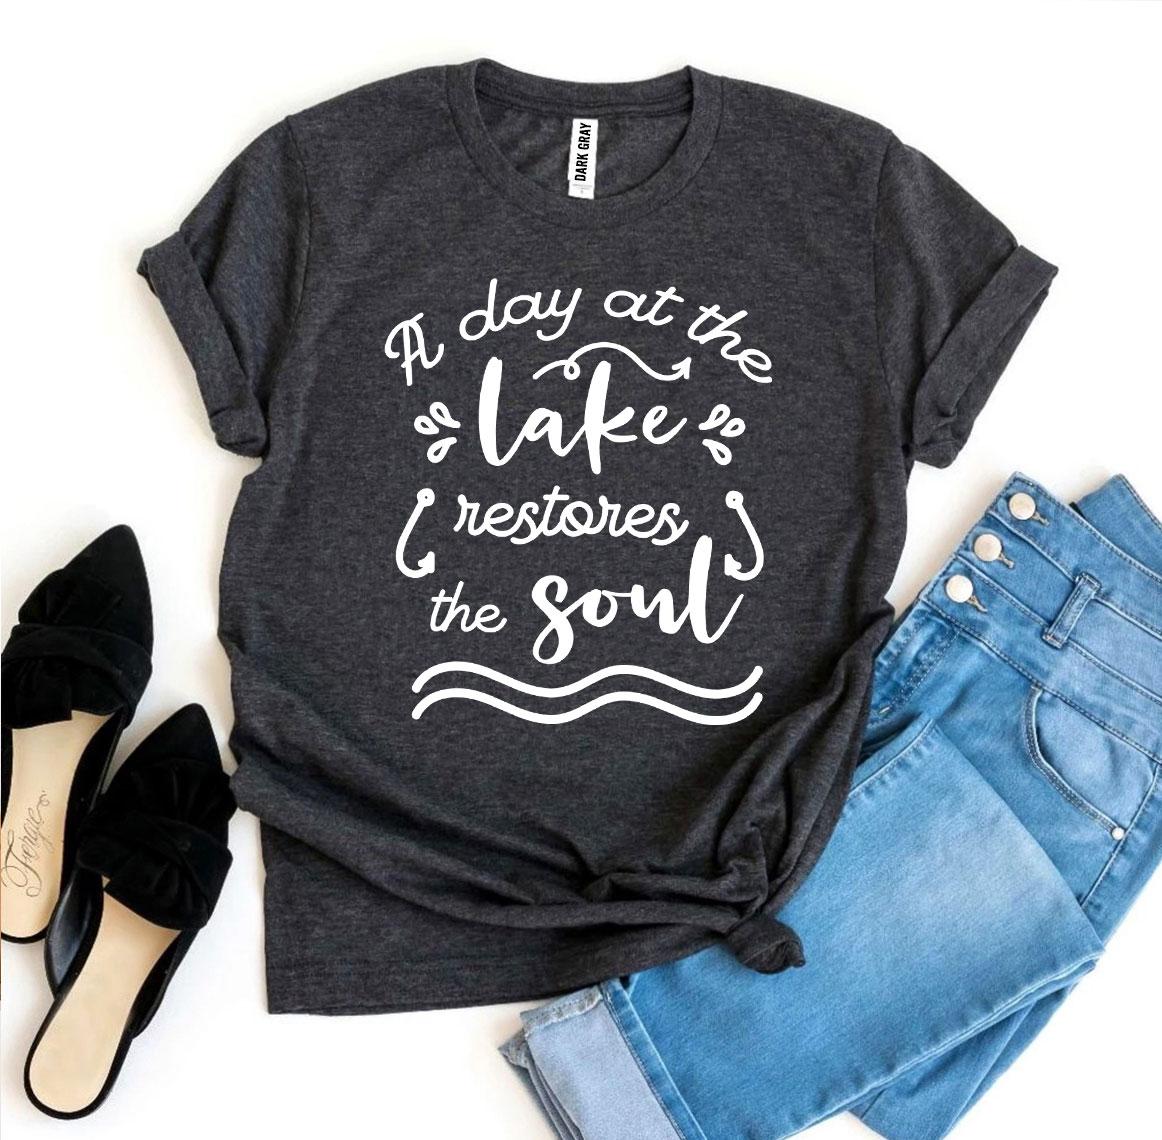 A Day At The Lake Restores The Soul T-shirt